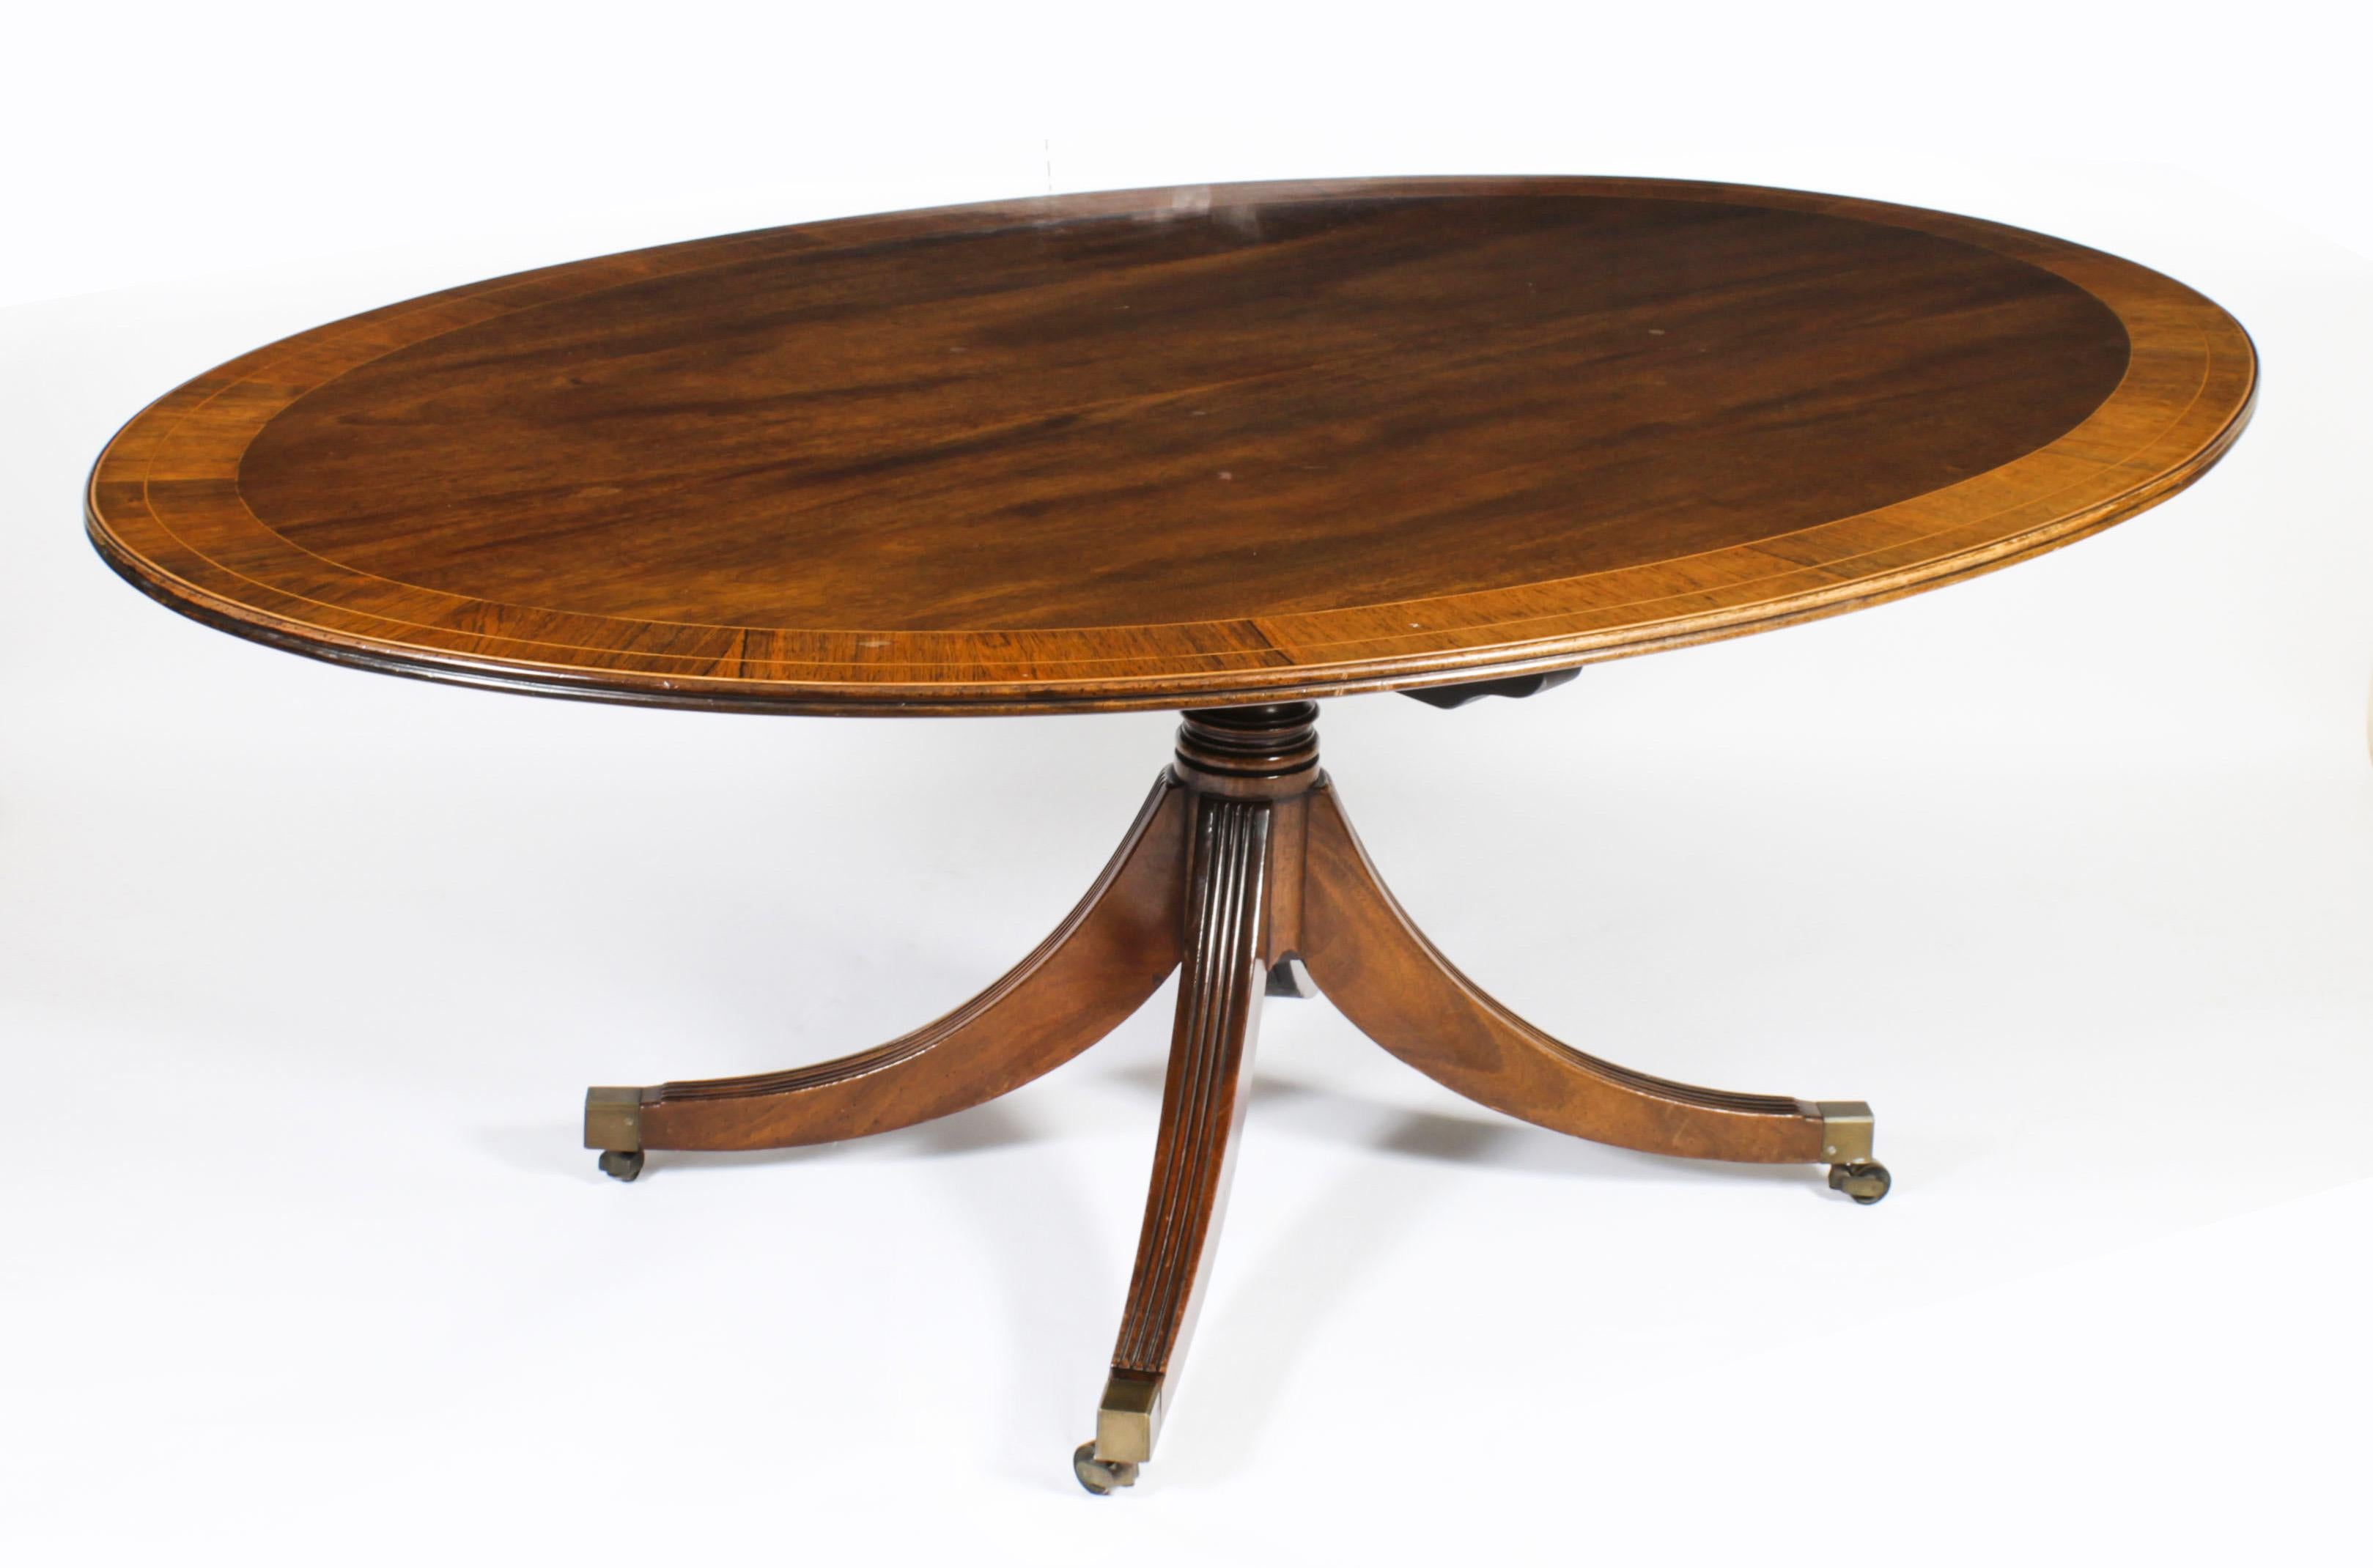 This is a beautiful antique Regency Revival flame mahogany and Gonçalo Alves banded tilt top oval dining table dating from Circa 1920, with a matching set of eight Regency Revival Barback dining chairs. 

The fabulous 6ft 6inch flame mahogany tilt